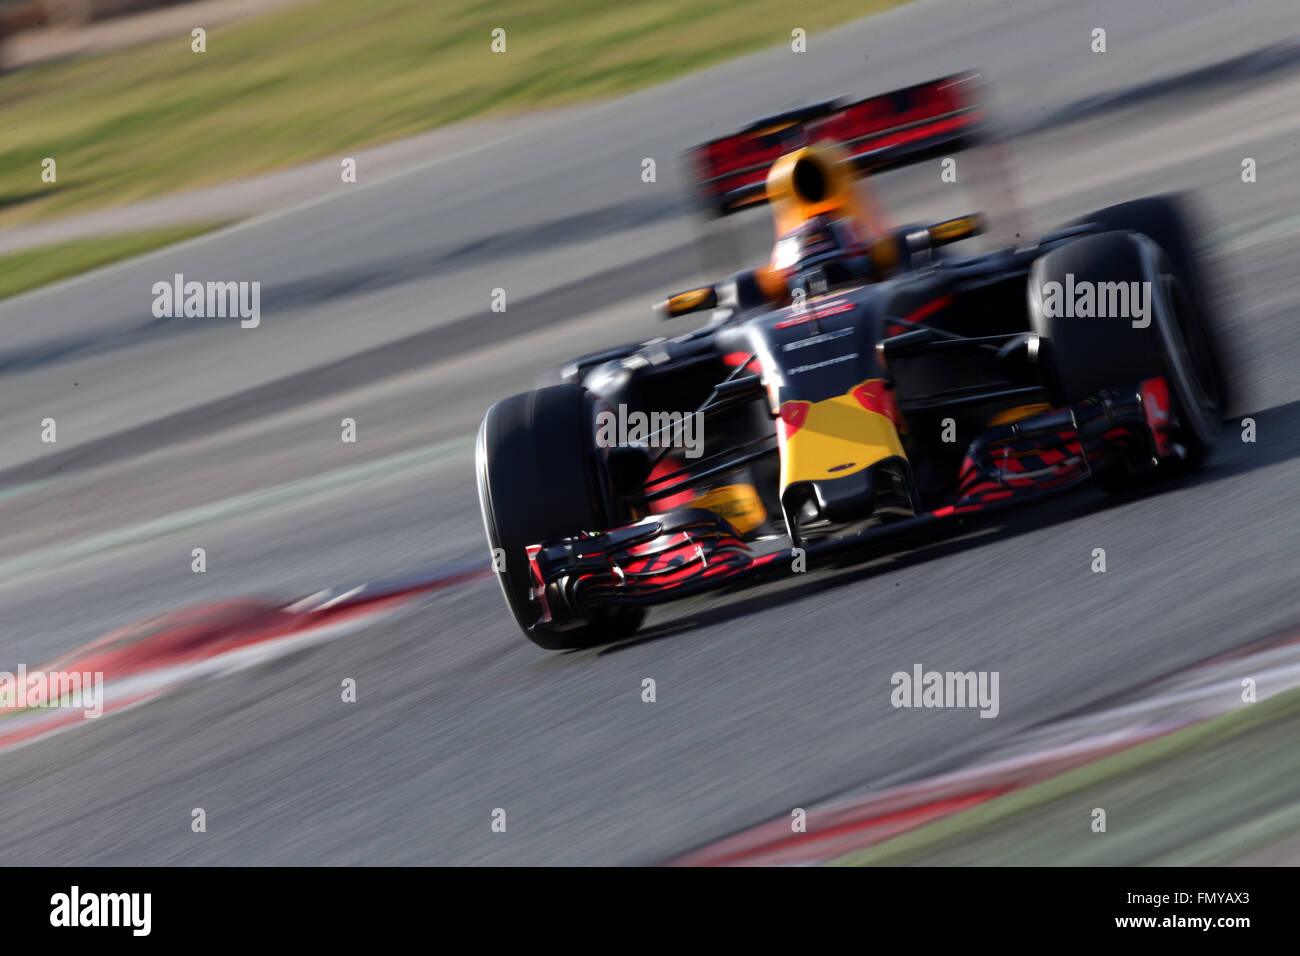 Russian Formula One driver Daniil Kvyat of Red Bull steers his car during the training session for the upcoming Formula One season at the Circuit de Barcelona - Catalunya in Barcelona, Spain, 24 February 2016. Photo: Jens Buettner/dpa Stock Photo